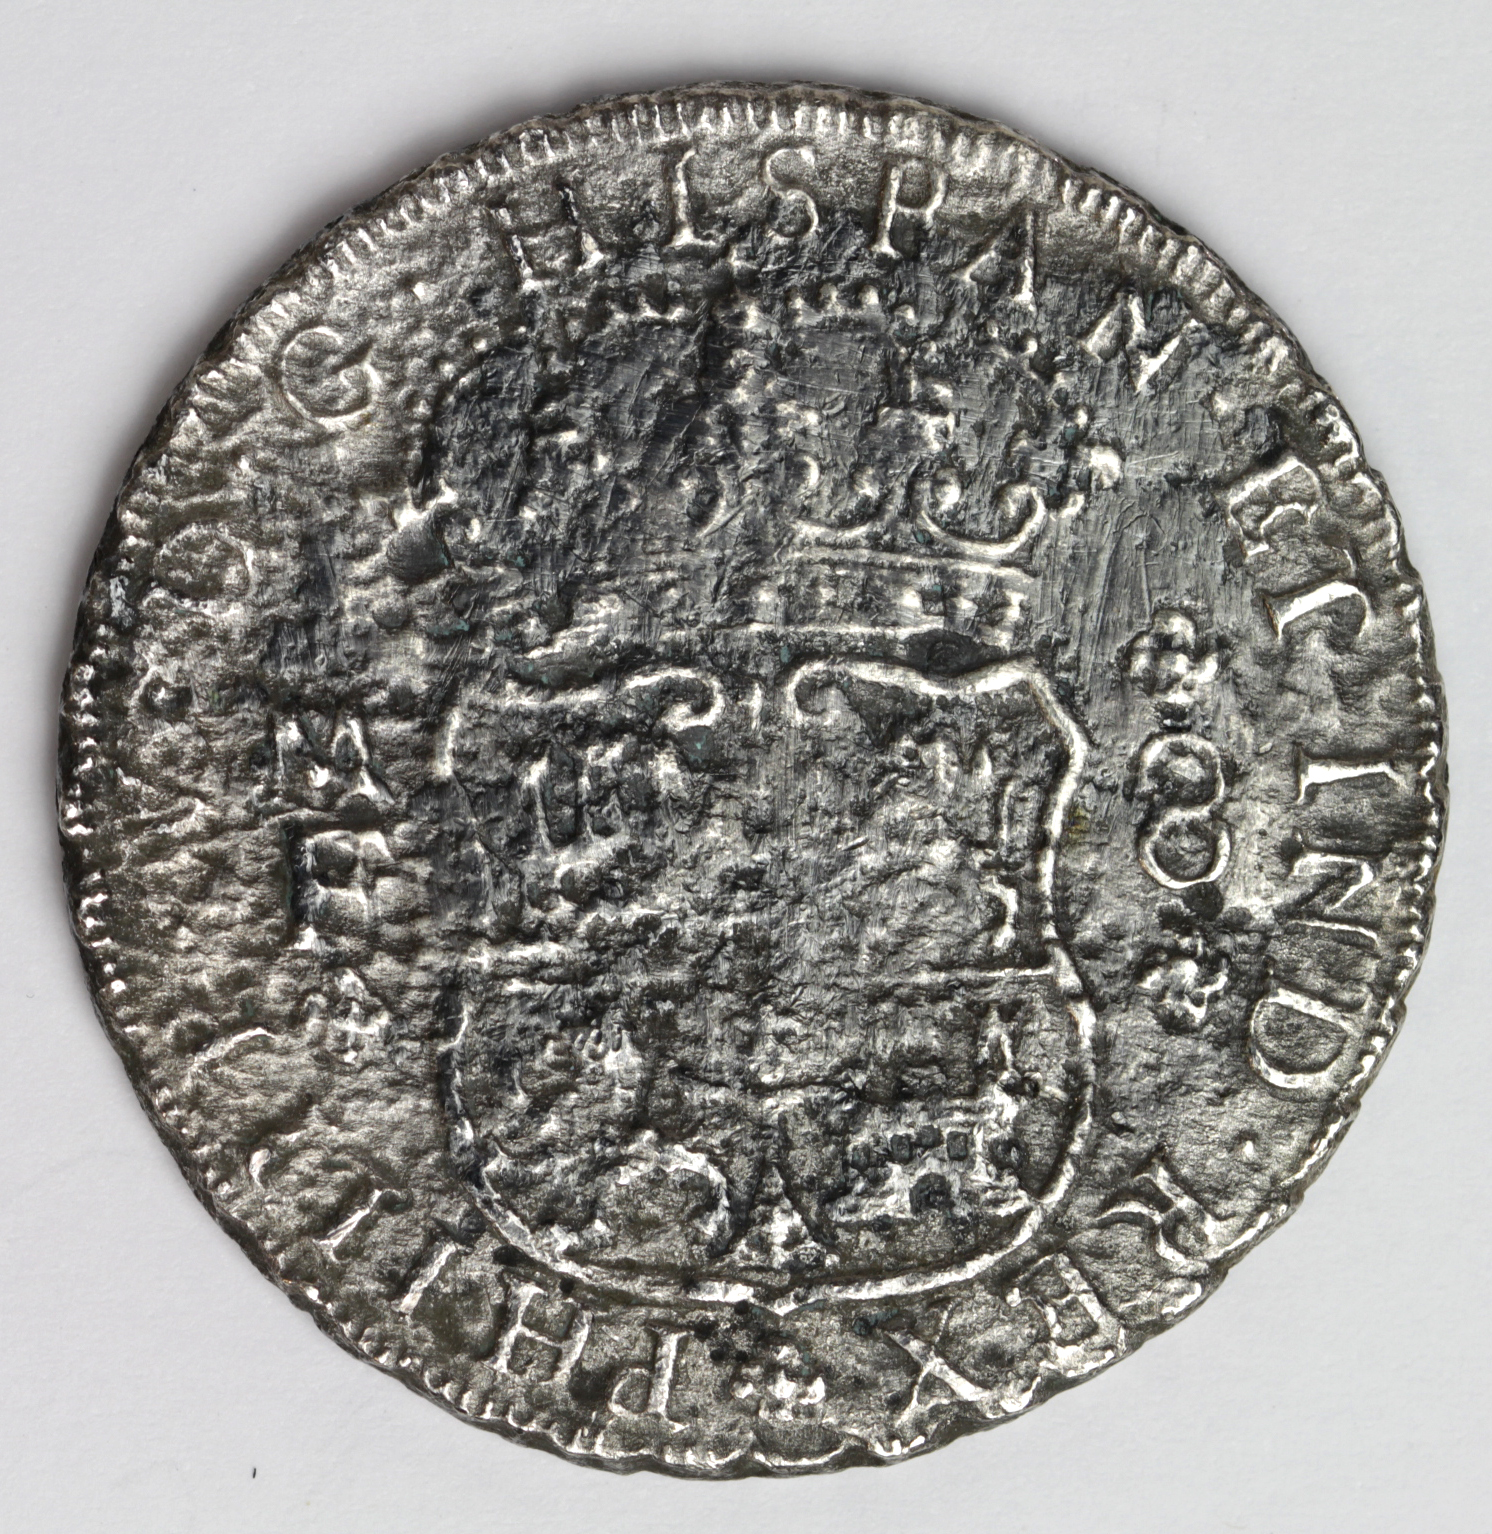 Spanish Mexico silver 8 Reales 1736 Mo MF, KM# 103, VF with heavy water damage on reverse (shipwreck - Image 2 of 2